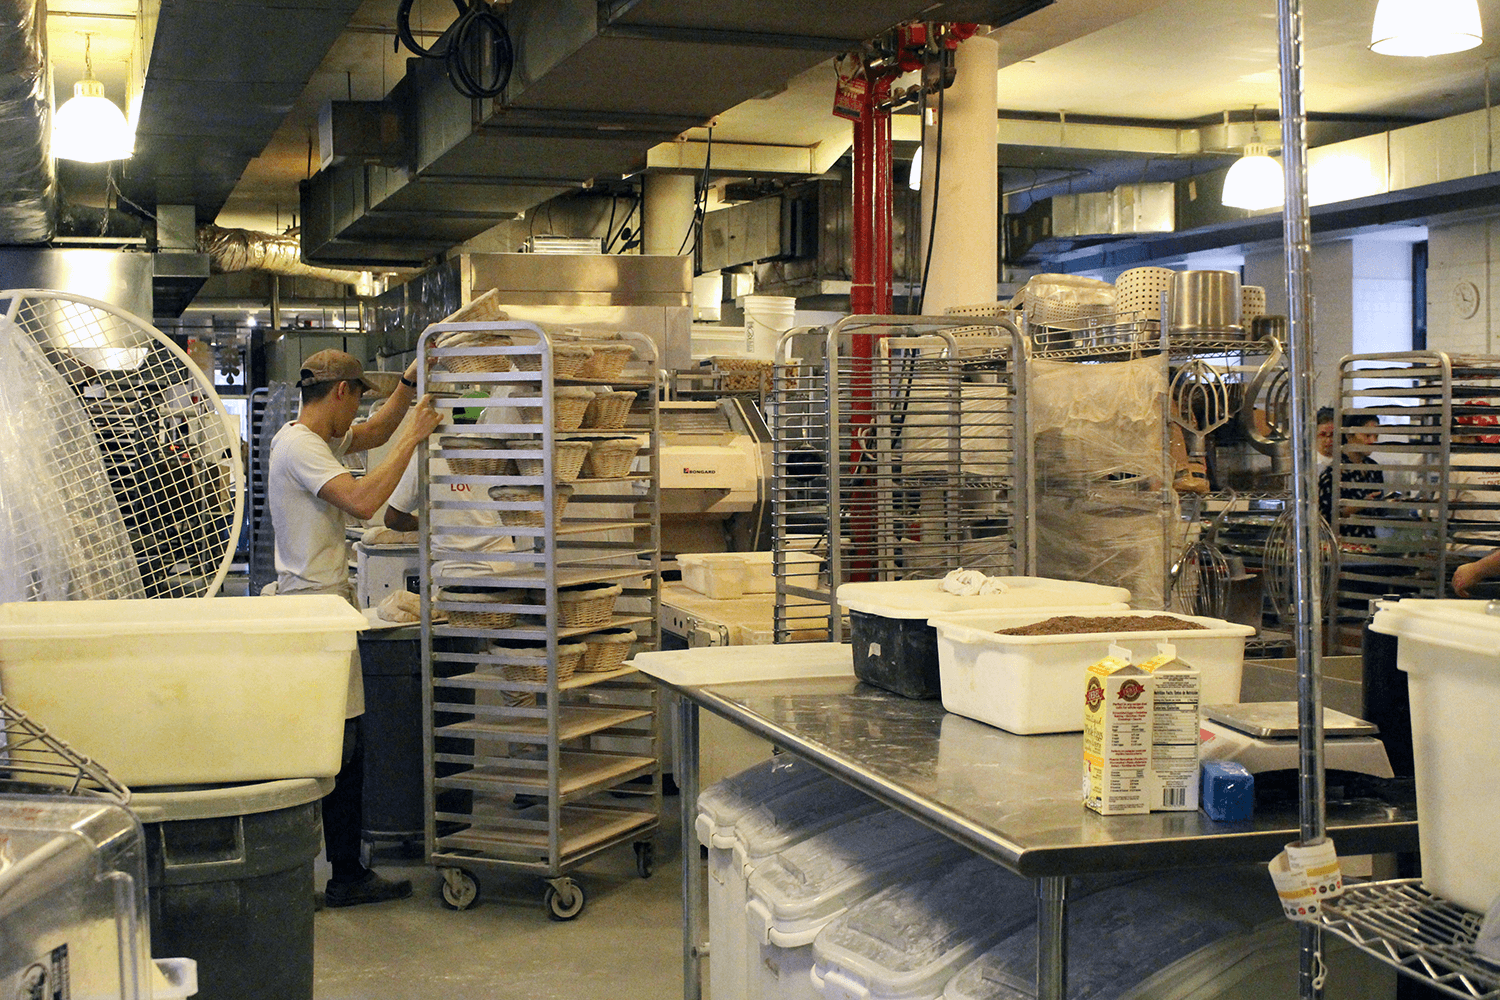 back of house at Breads Bakery in Union Square, New York City (March 2020)